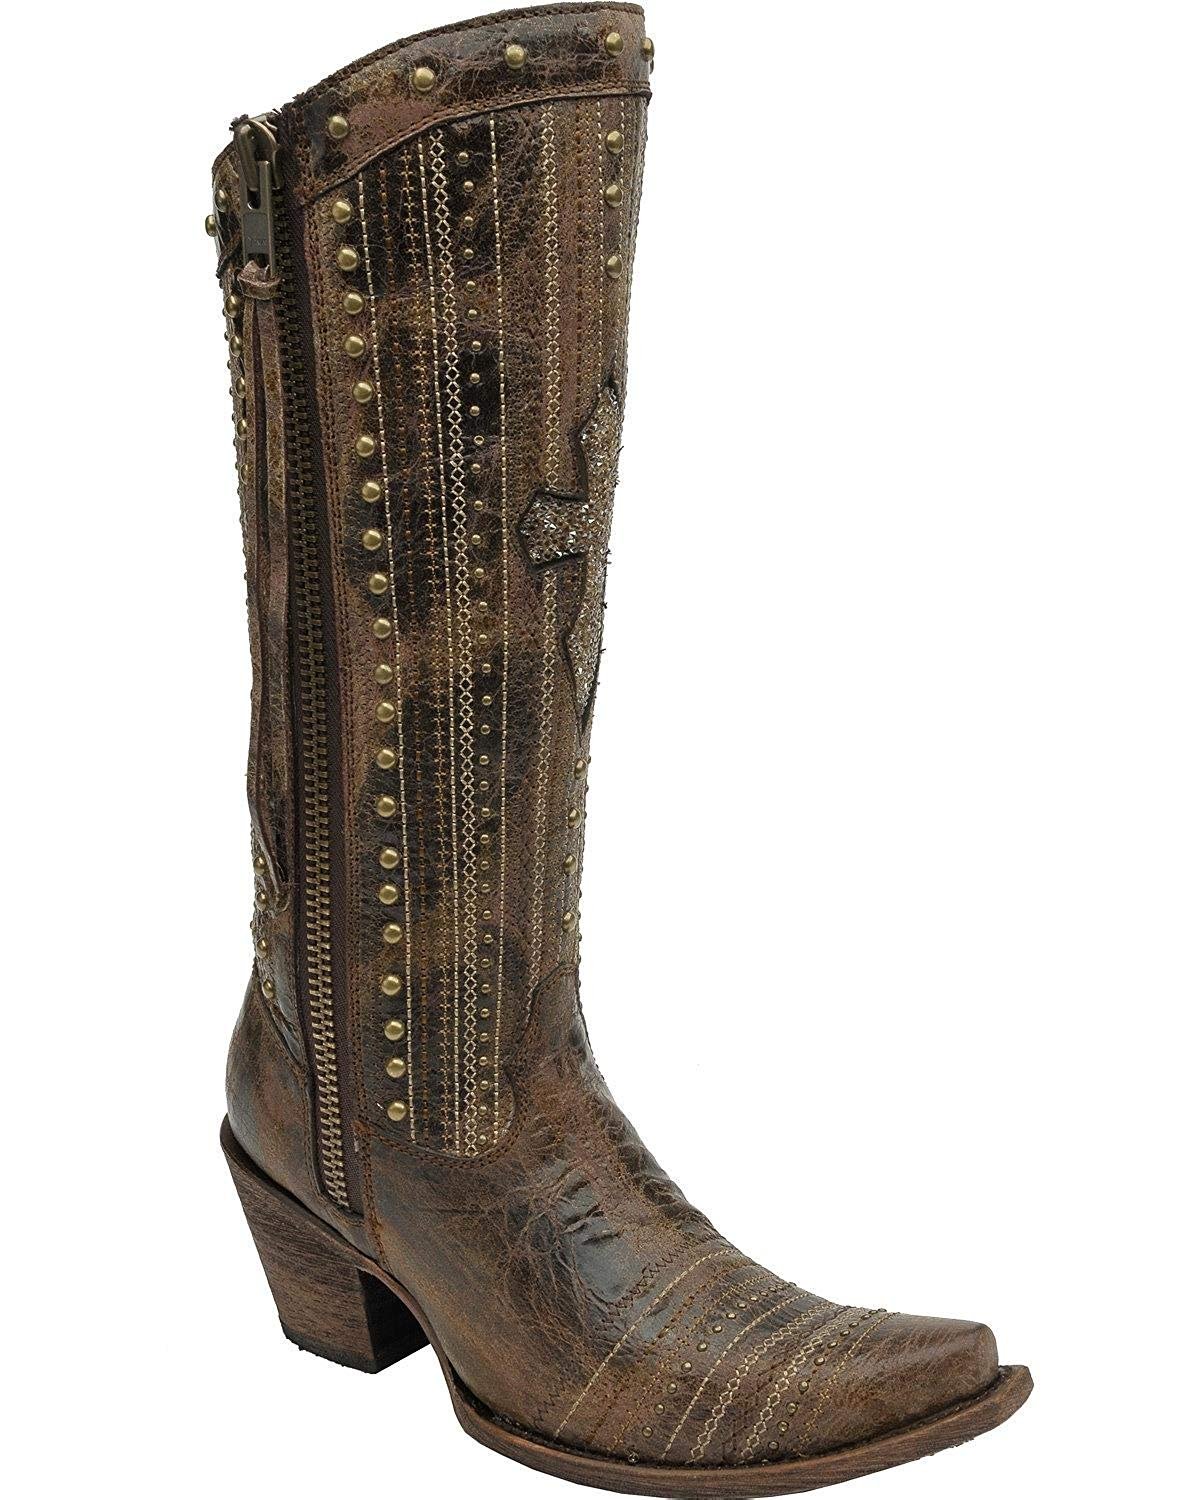 Pre-owned Corral Boots Corral Women's Crystal Cross Stripes And Studs Tall Boot Snip Toe - C2925 In Brown